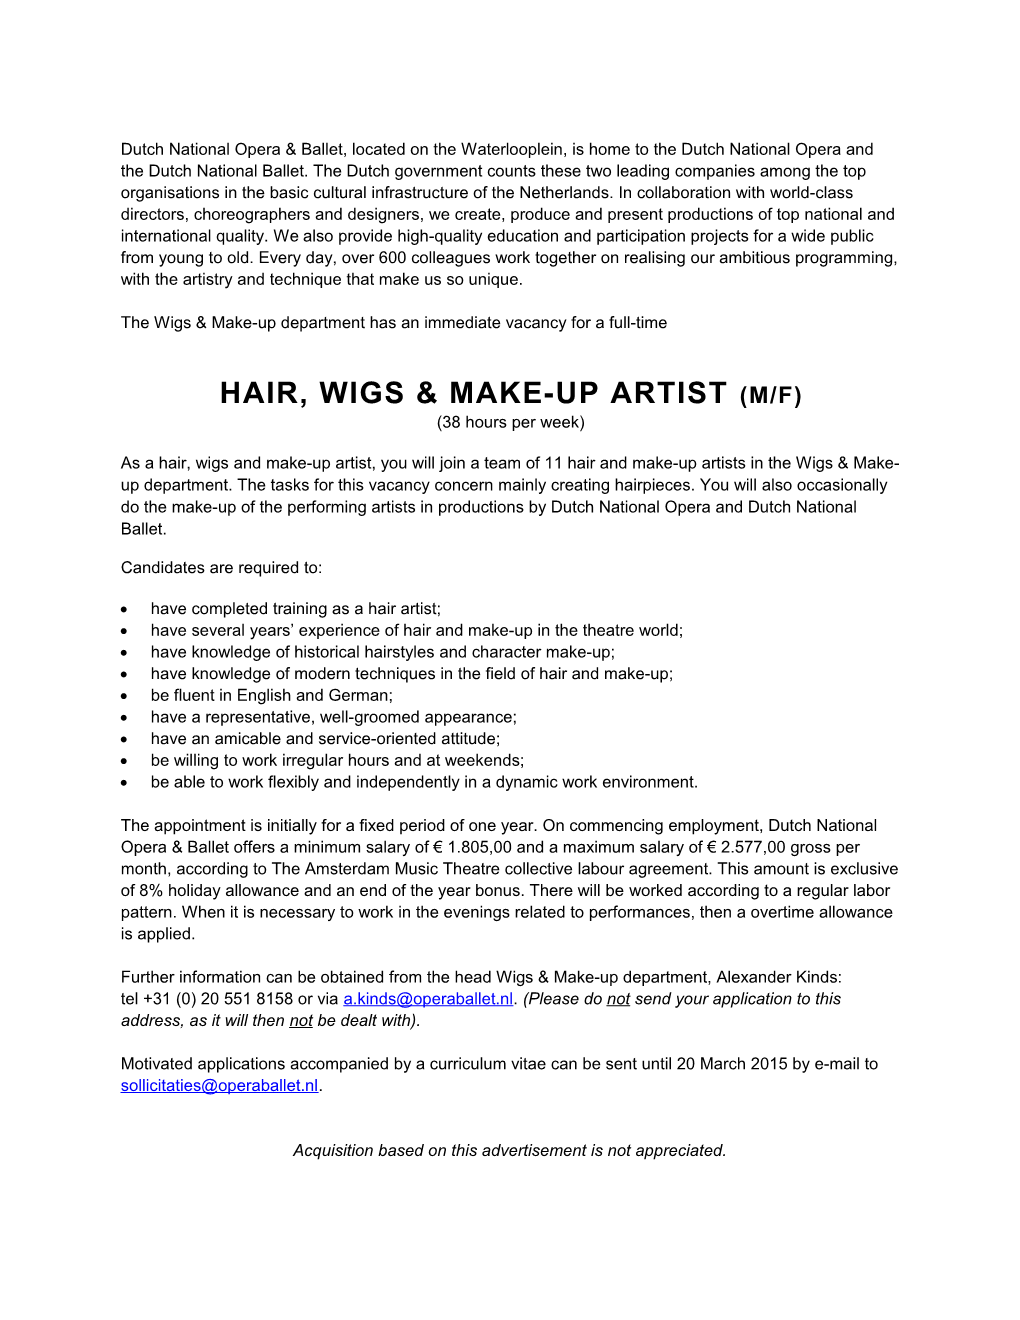 The Wigs & Make-Up Department Has an Immediate Vacancy for a Full-Time